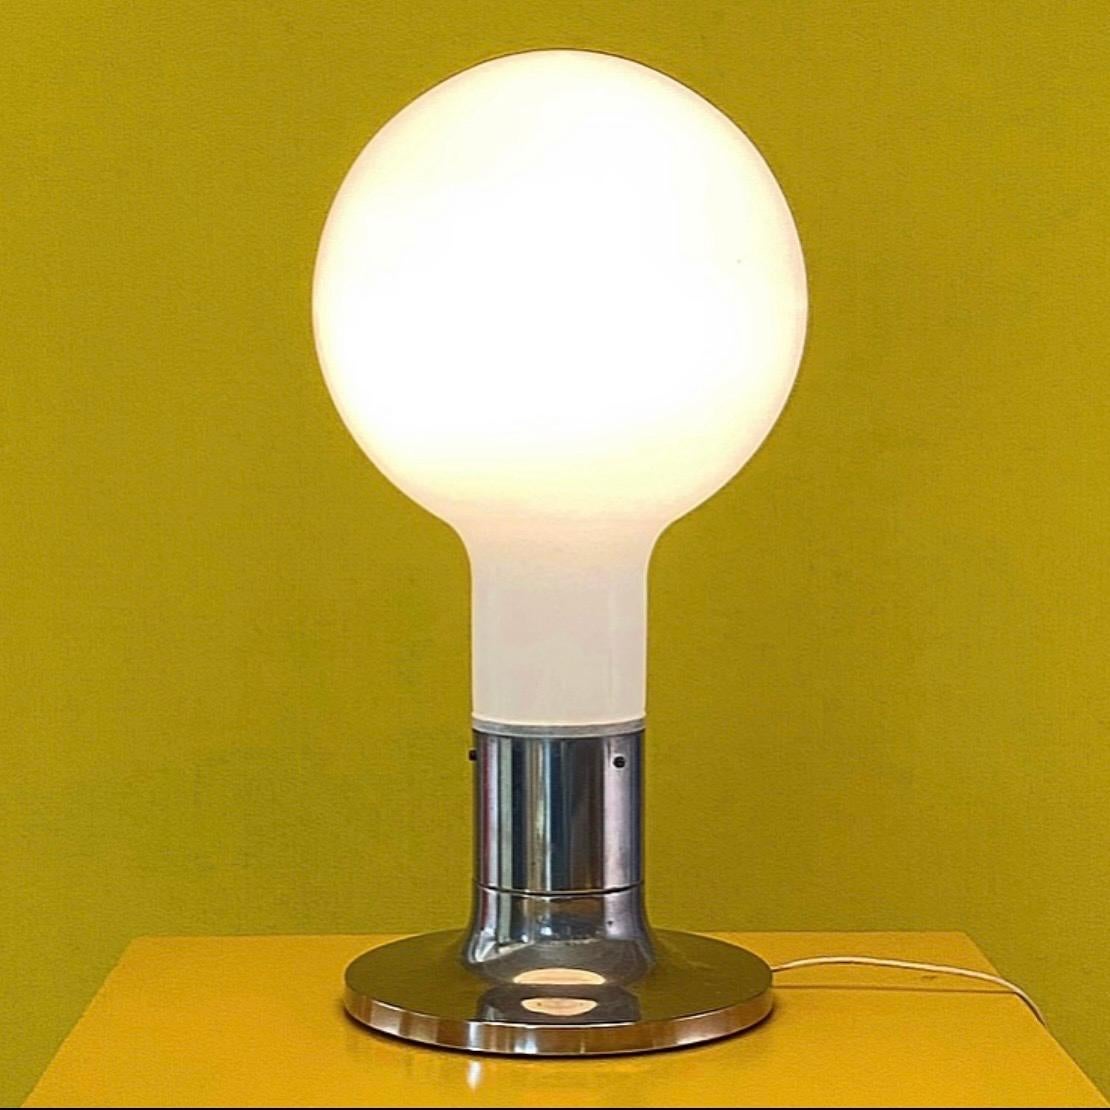 Thick milky white opaline glass lamp with a base of chrome plated metal base produced by Temde, Switzerland 1970s.

It’s super special and quite famous since it was used in the 1970s movie called “A clockwork orange”. 

Shape like a ball, huge